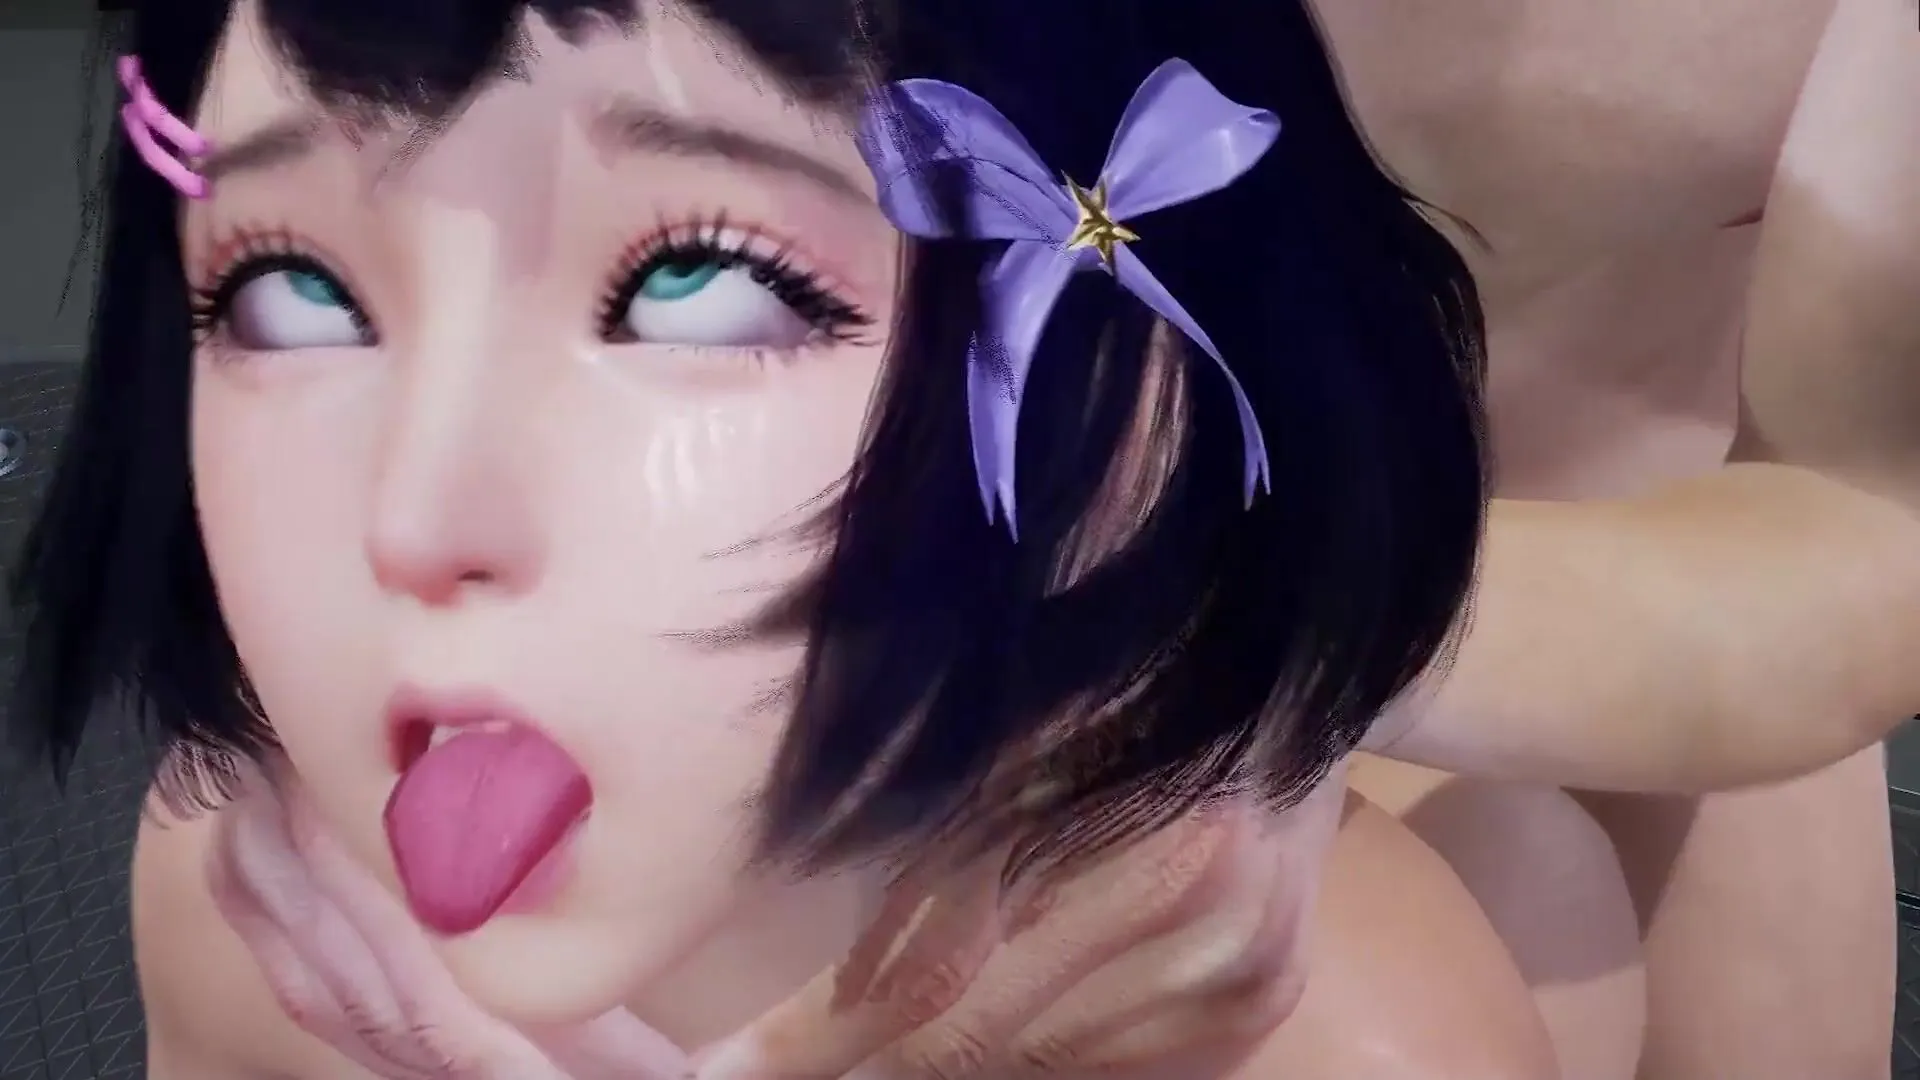 Asian Fucked Silly - Sexy Asian Girl Fucked Silly until she gets an Ahegao face | 3D Porn